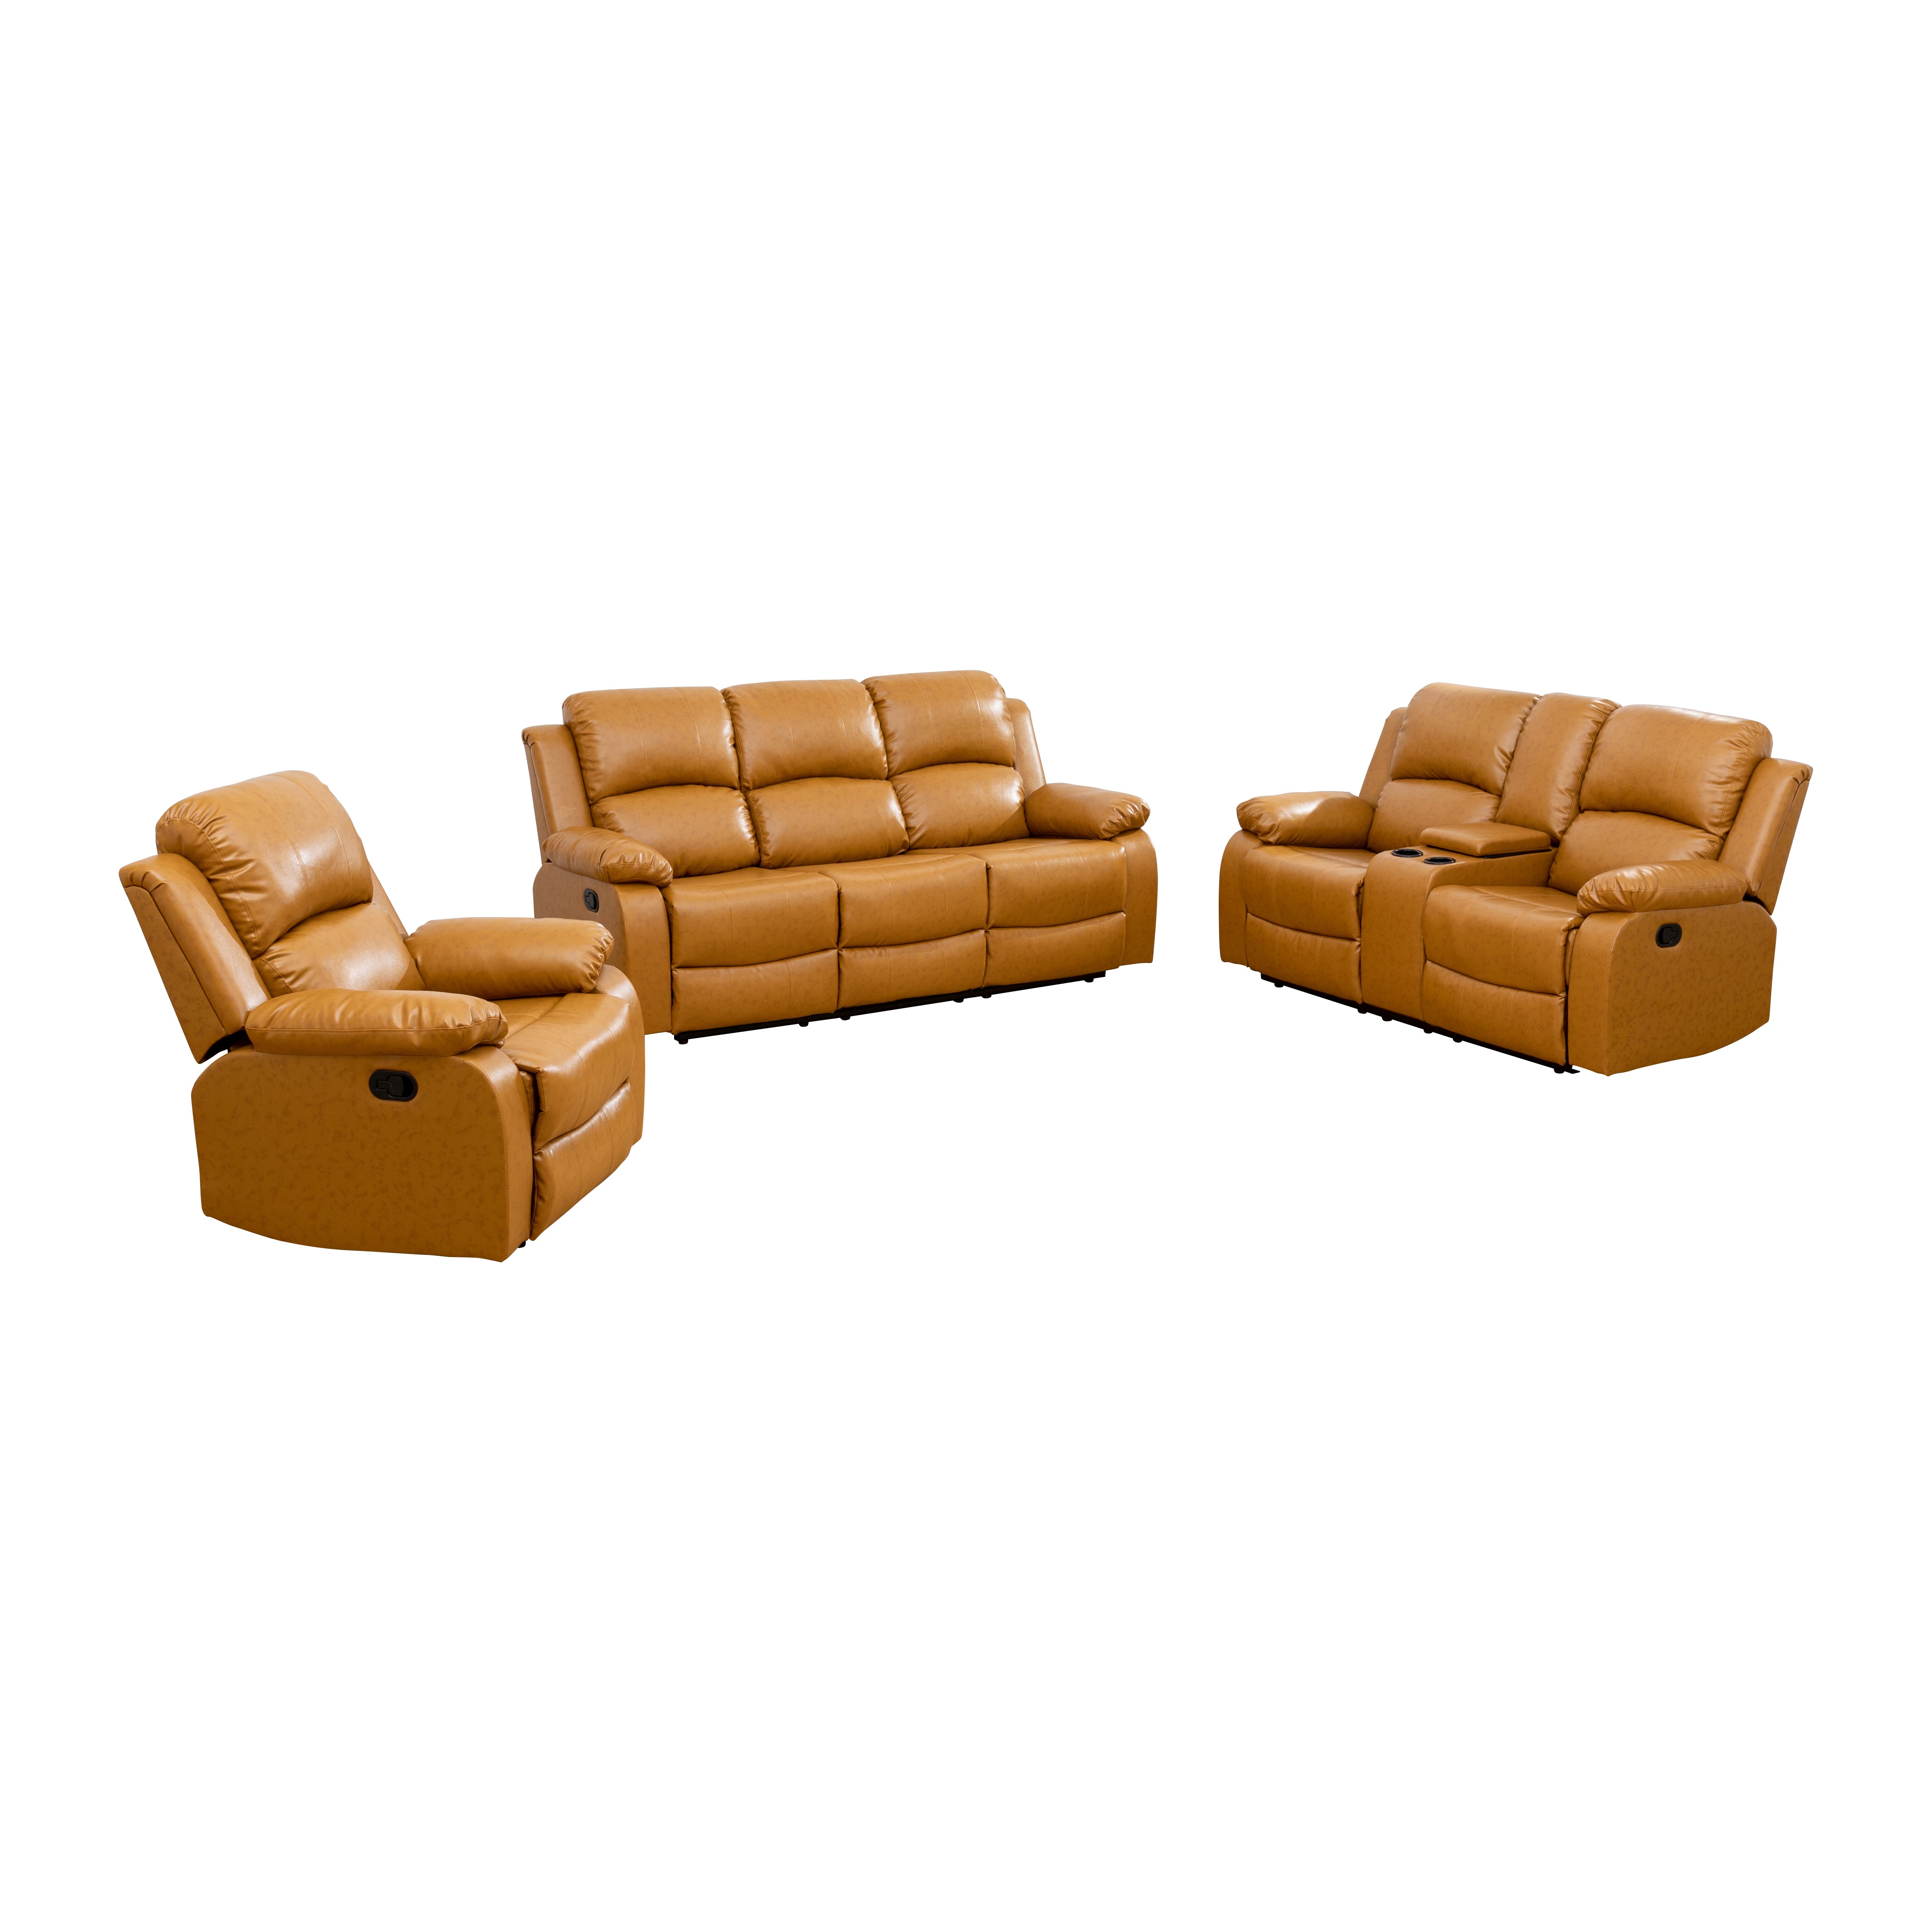 Ainehome Ginger Recycled Leather 3-Piece Couch Living Room Sofa Set